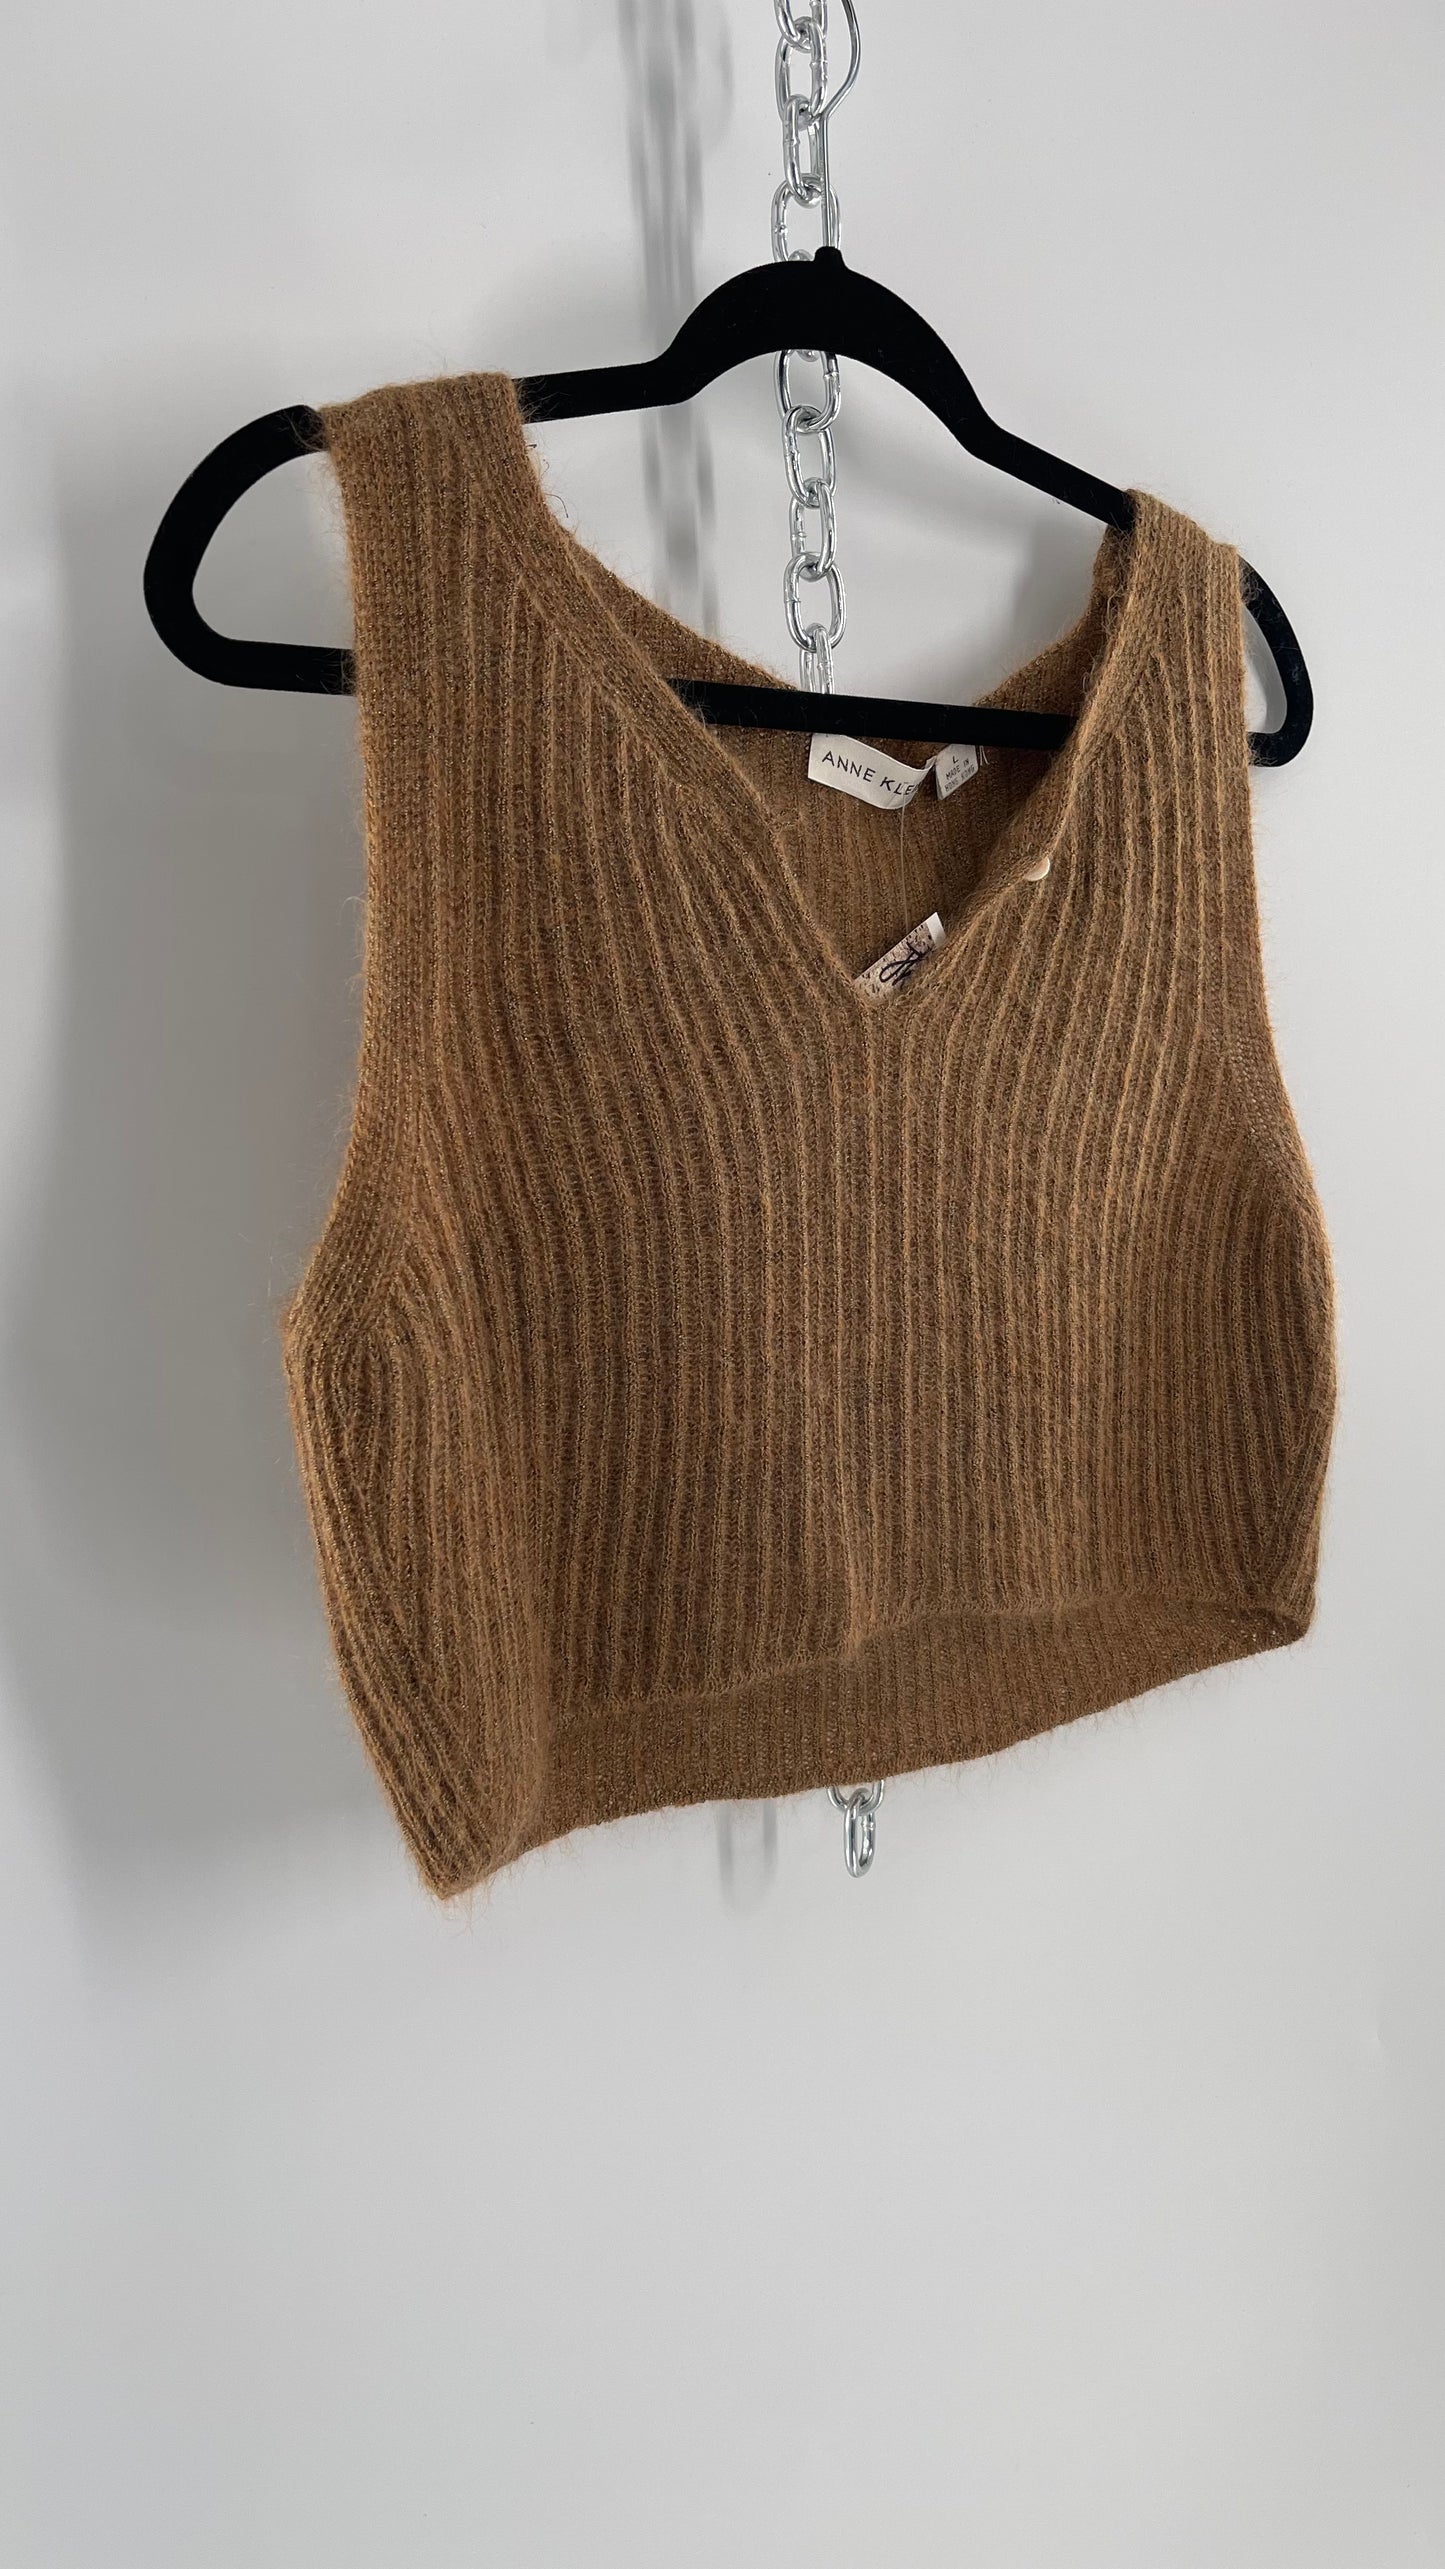 Vintage Anne Klein 42% Mohair Tan Knit Tank with Gold Tinsel (Large)